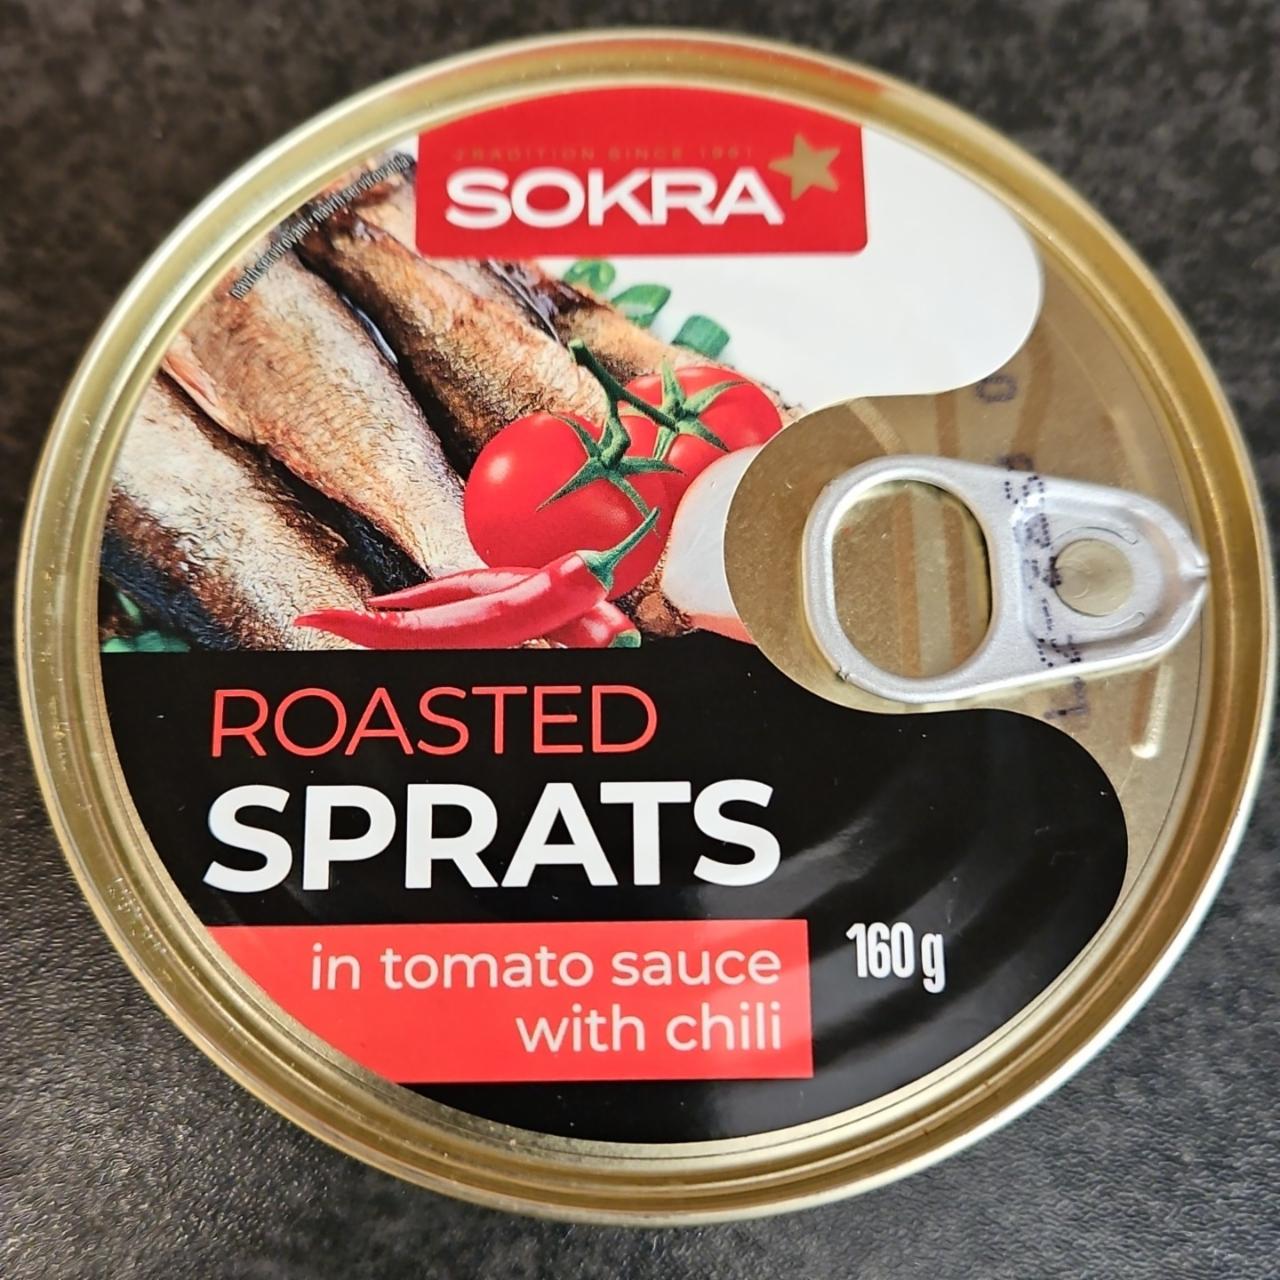 Fotografie - Roasted Sprats in tomato sauce with chili Sokra